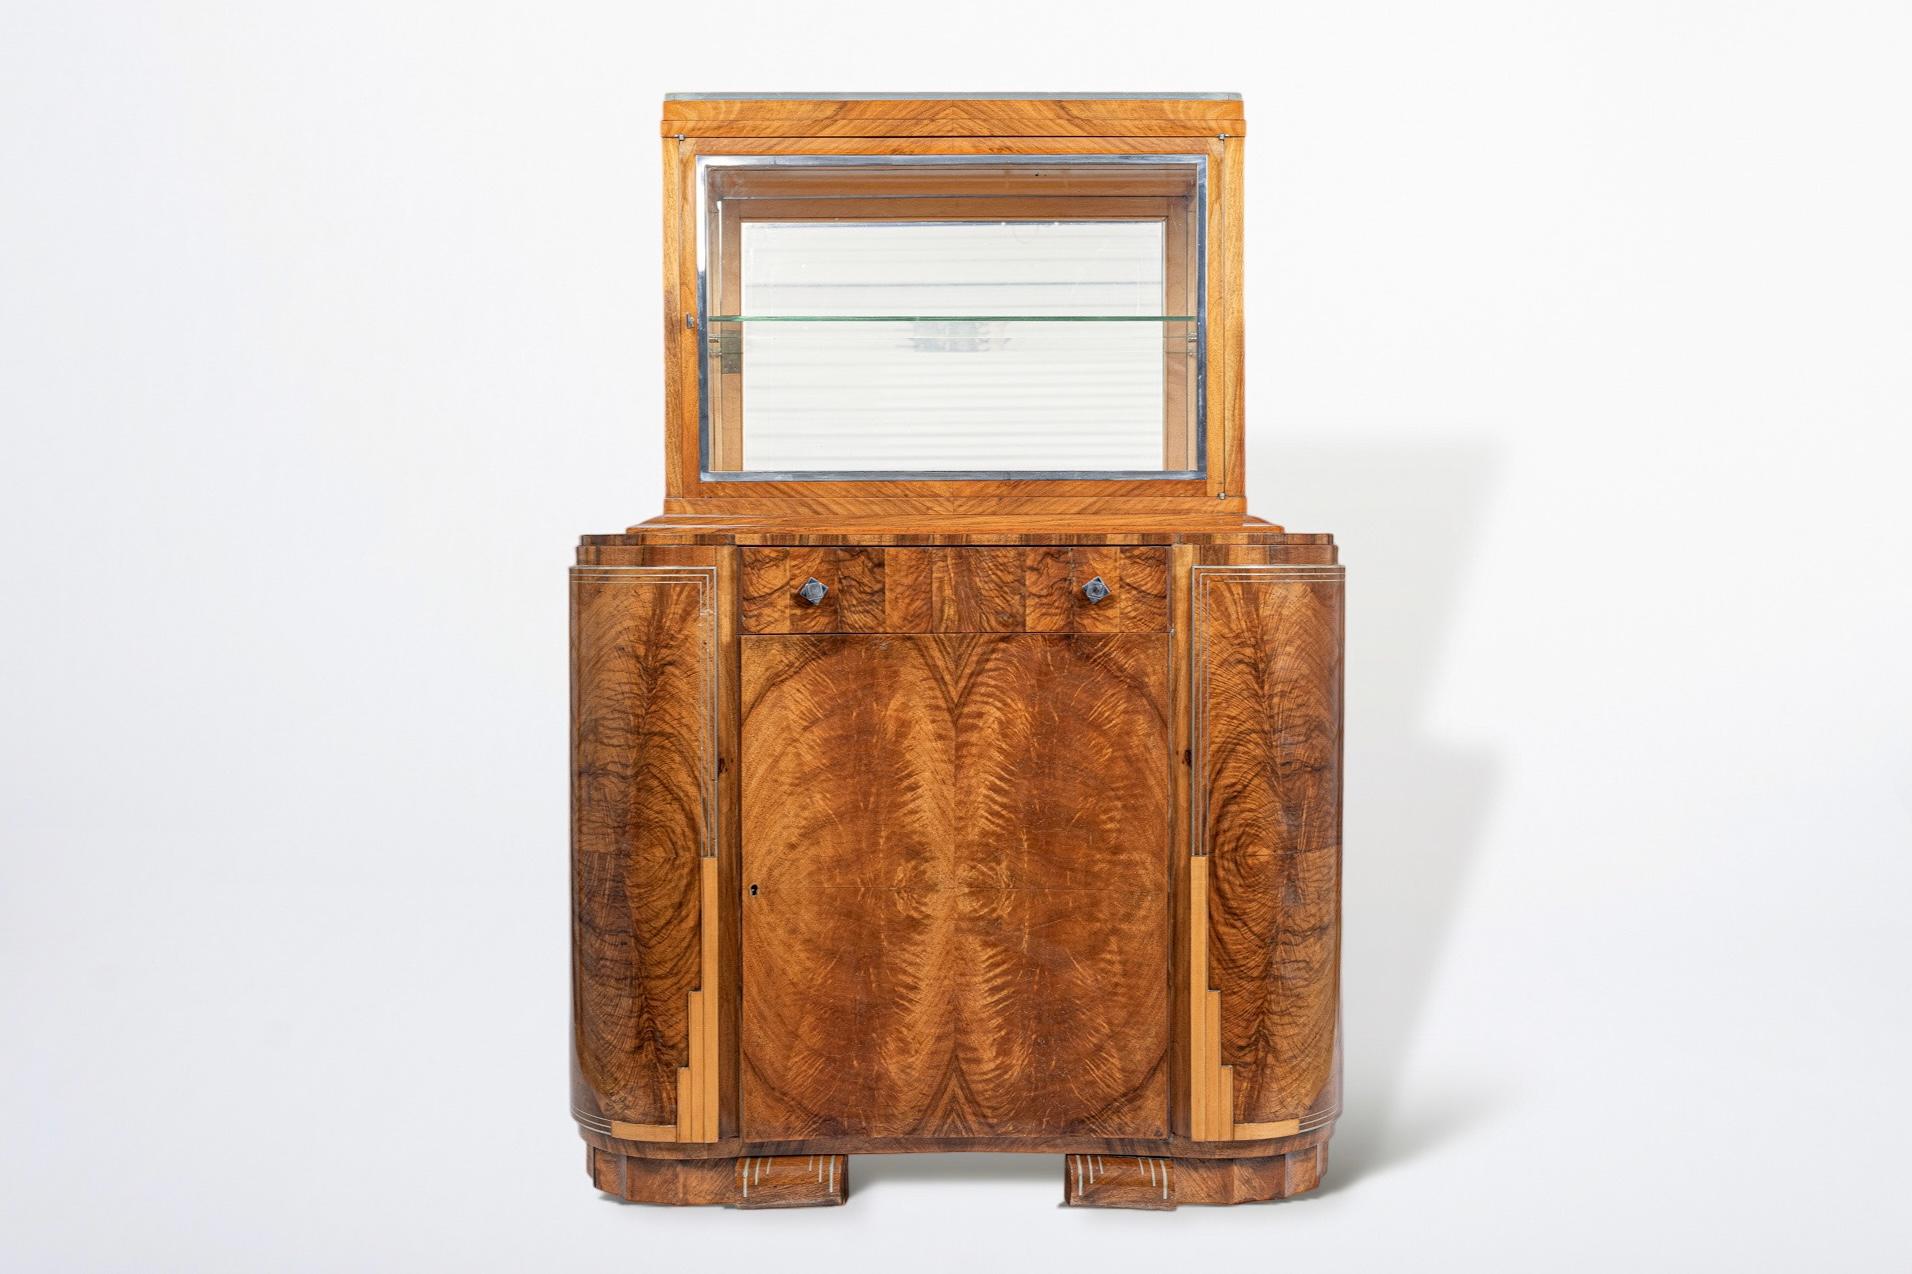 This exquisite antique French Art Deco wood and glass vitrine display cabinet or bar cabinet is circa 1930. It is impeccably handcrafted from high quality materials including solid wood and mahogany crotched veneer with gorgeous grain patterning and